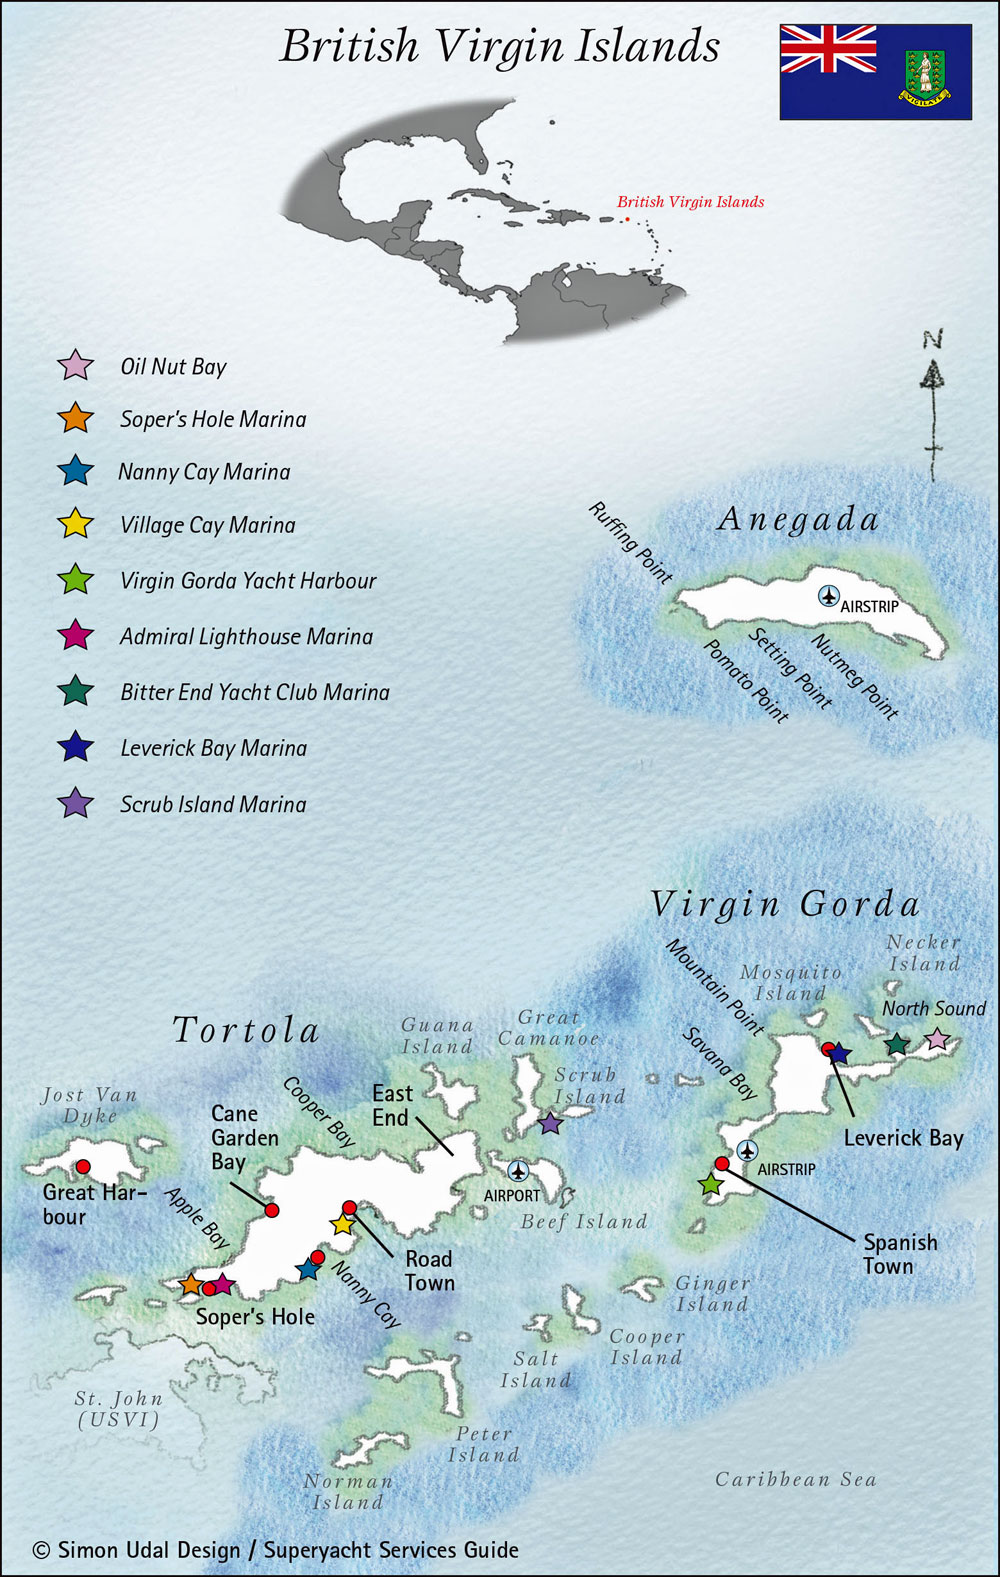 Map of the British Virgin Islands (BVIs) in the Caribbean